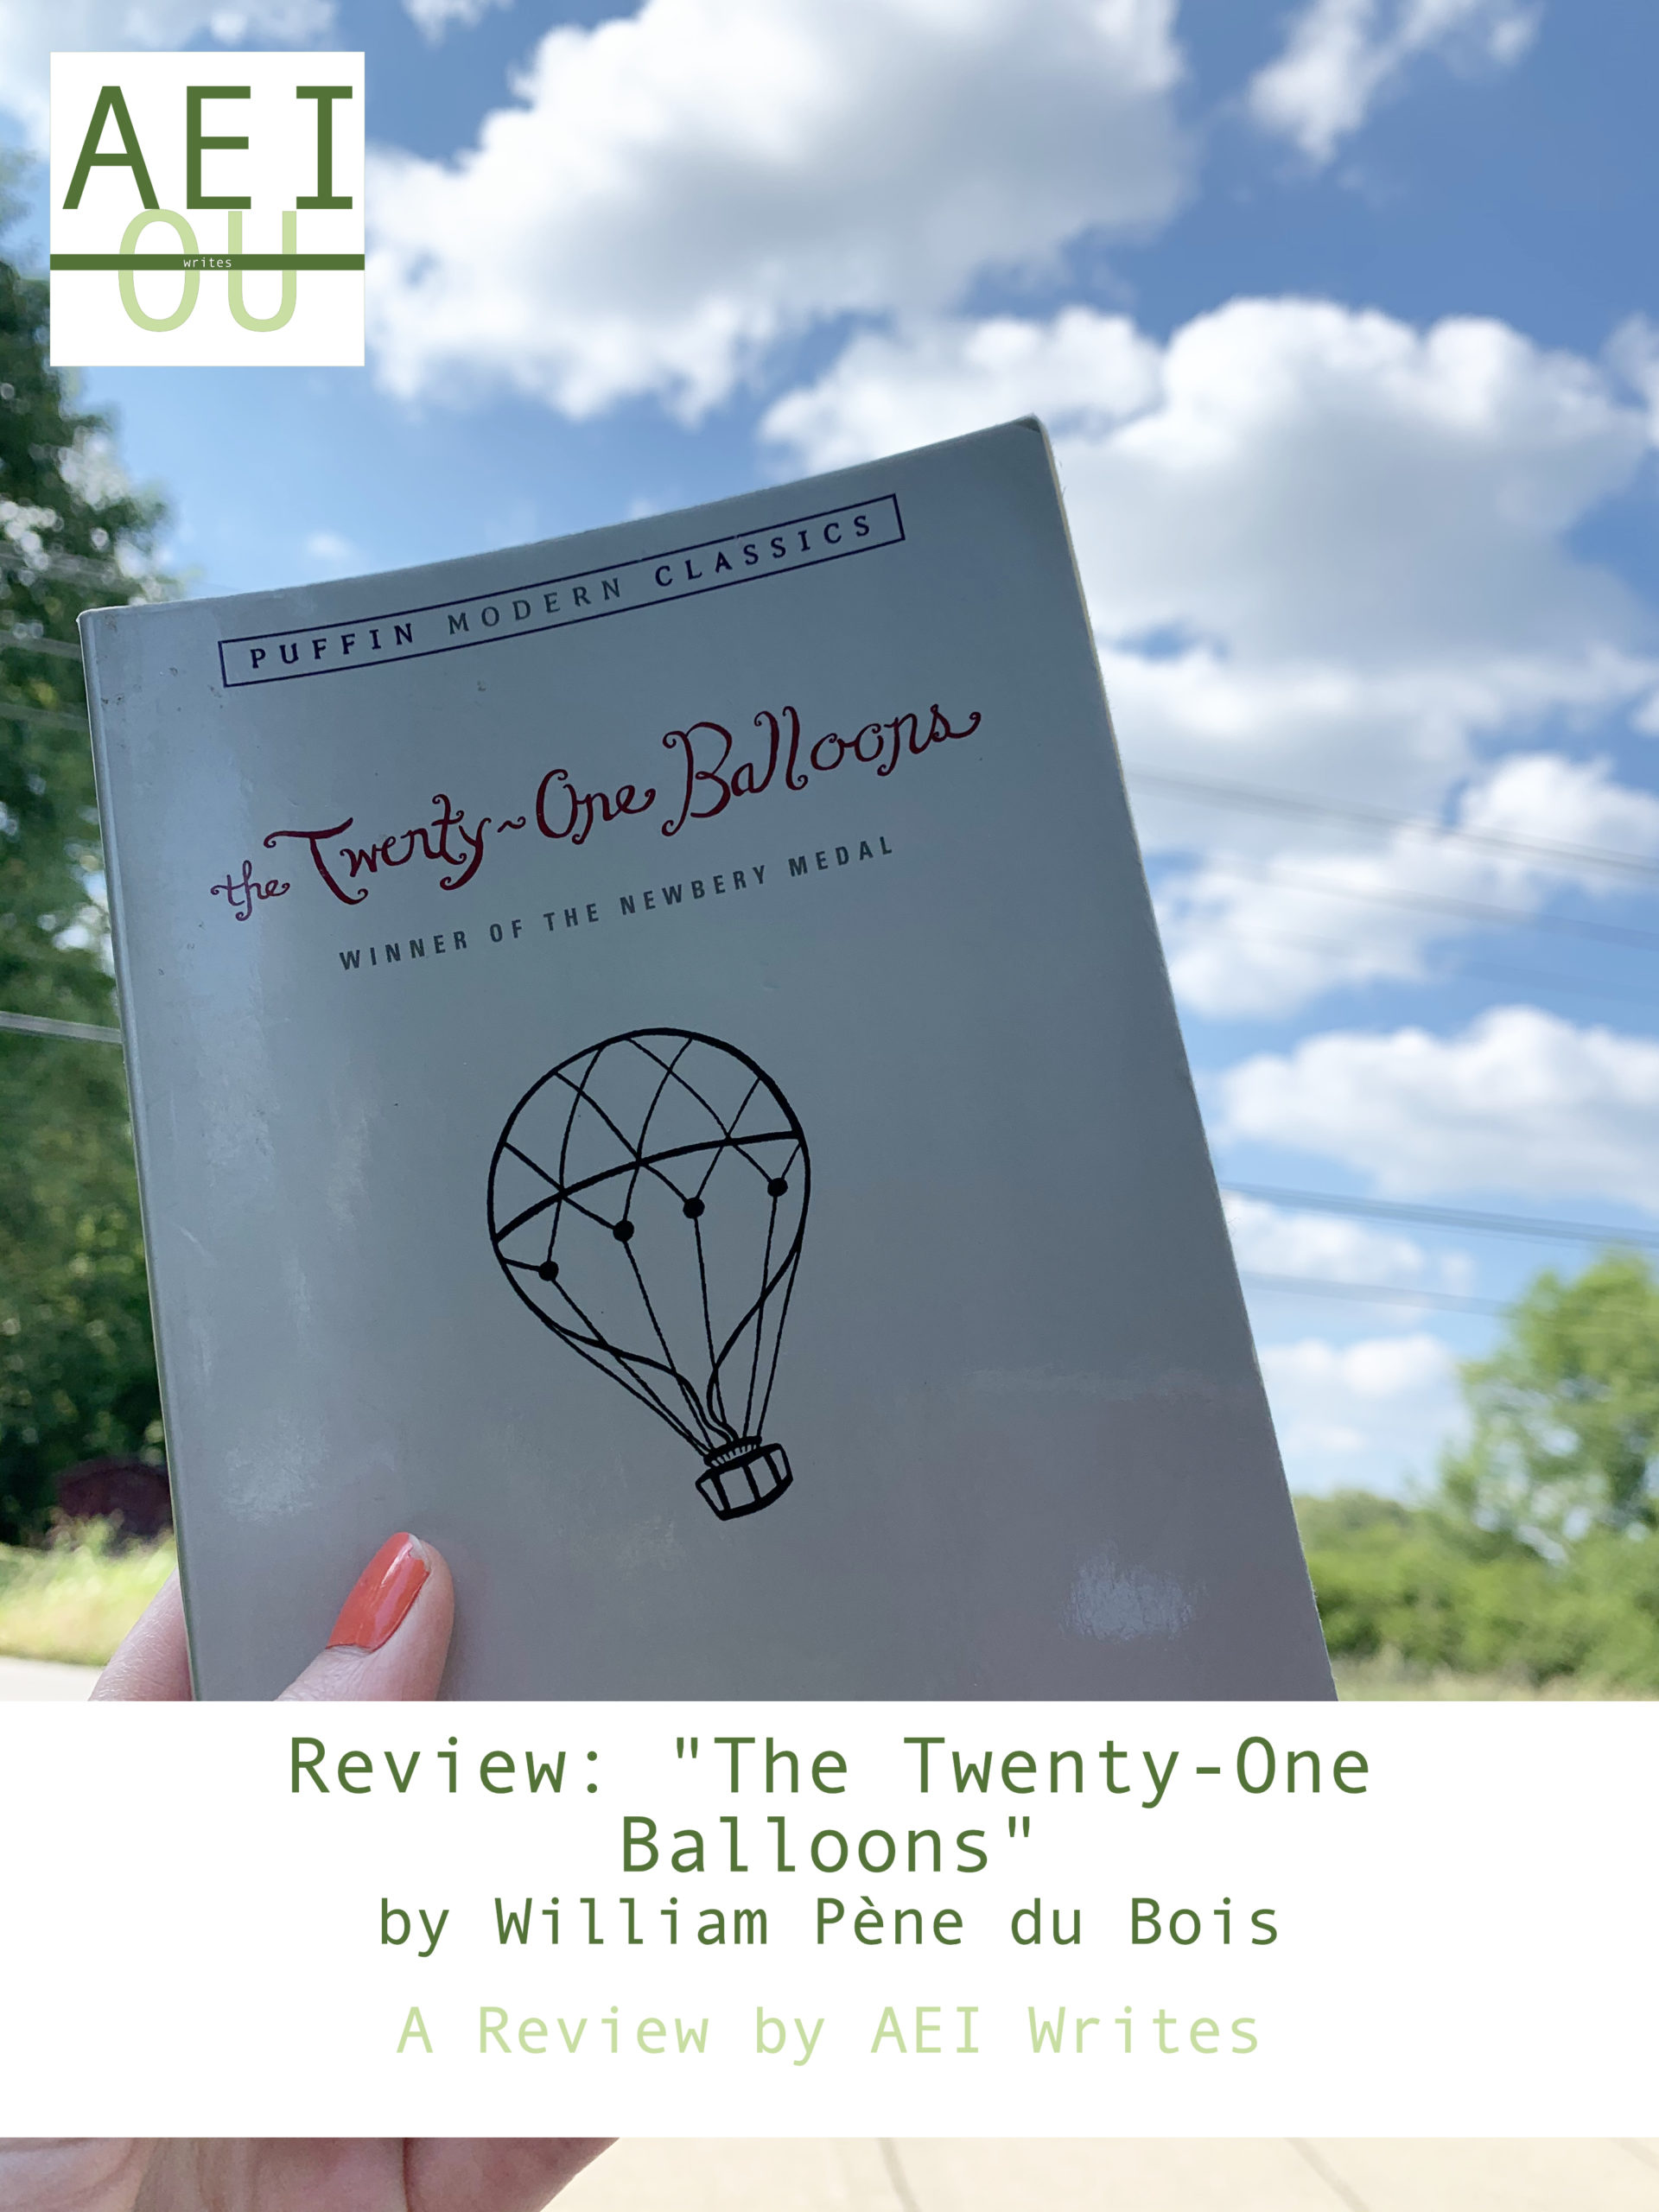 Review: “The Twenty-One Balloons”